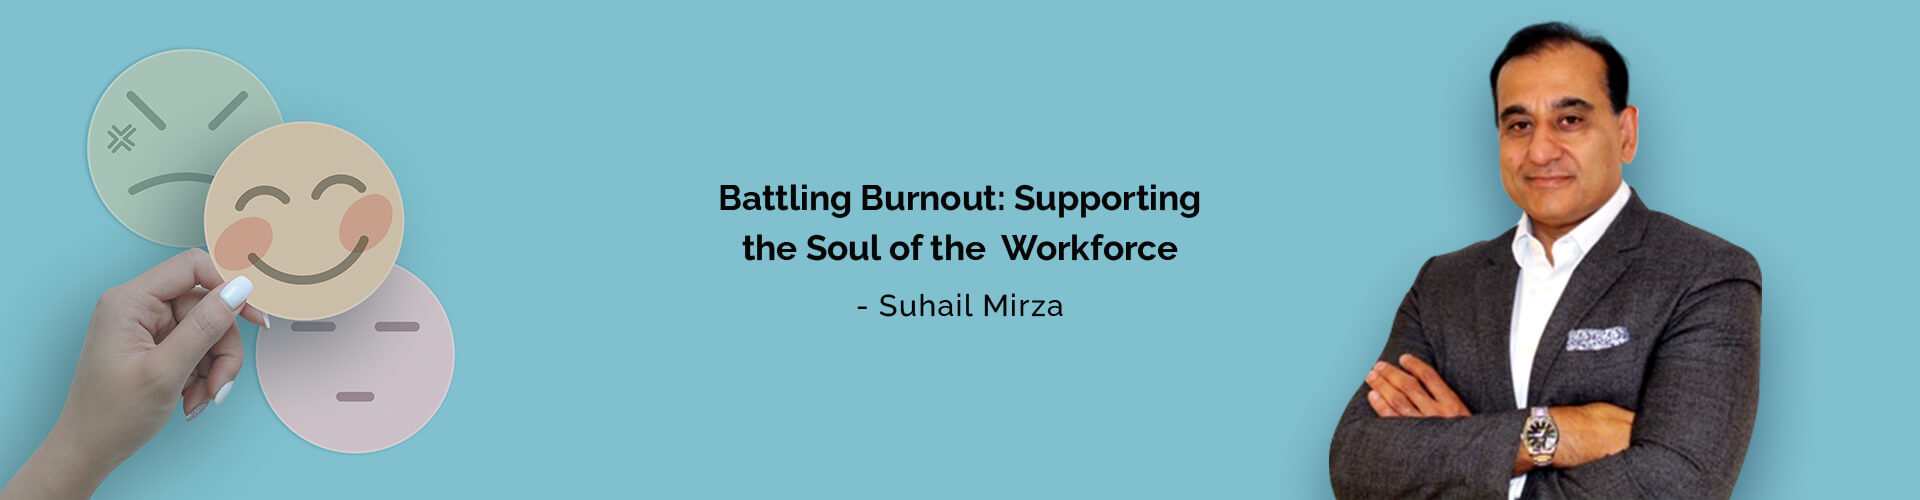 Battling Burnout: Supporting the Soul of the Workforce